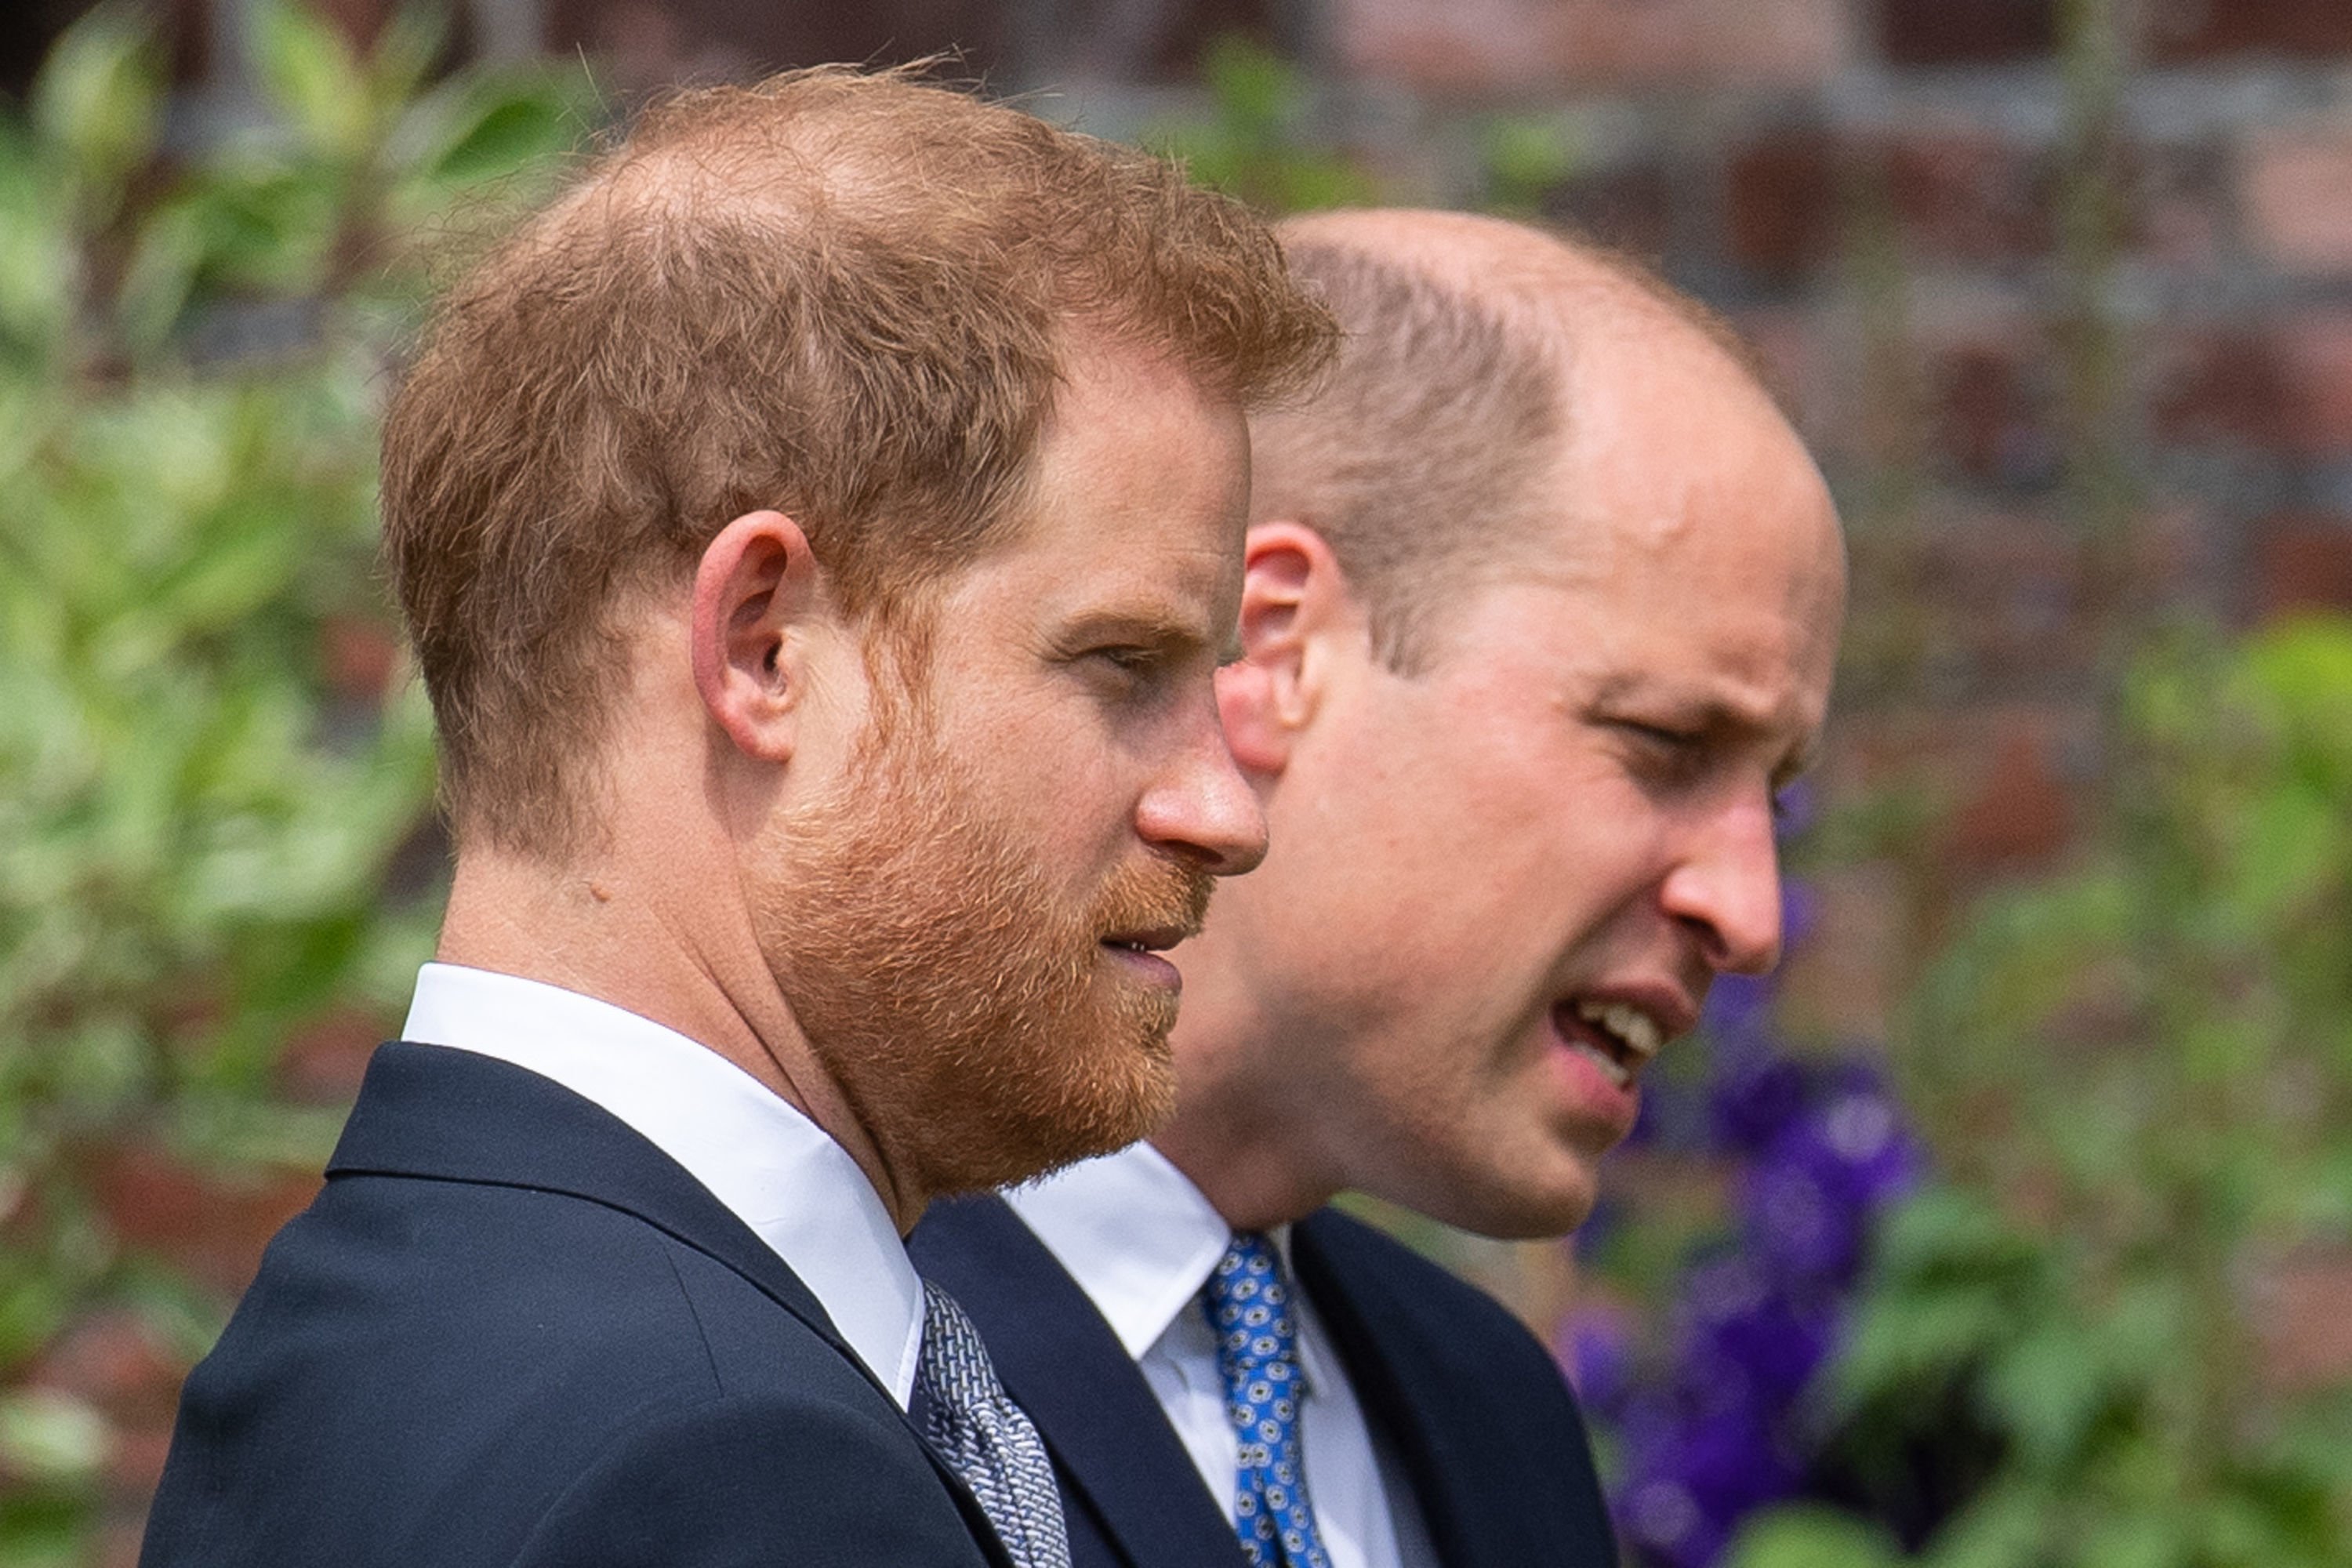 Prince Harry, Duke of Sussex and Prince William, Duke of Cambridge in the Sunken Garden at Kensington Palace on July 1, 2021 in London, England. | Source: Getty Images